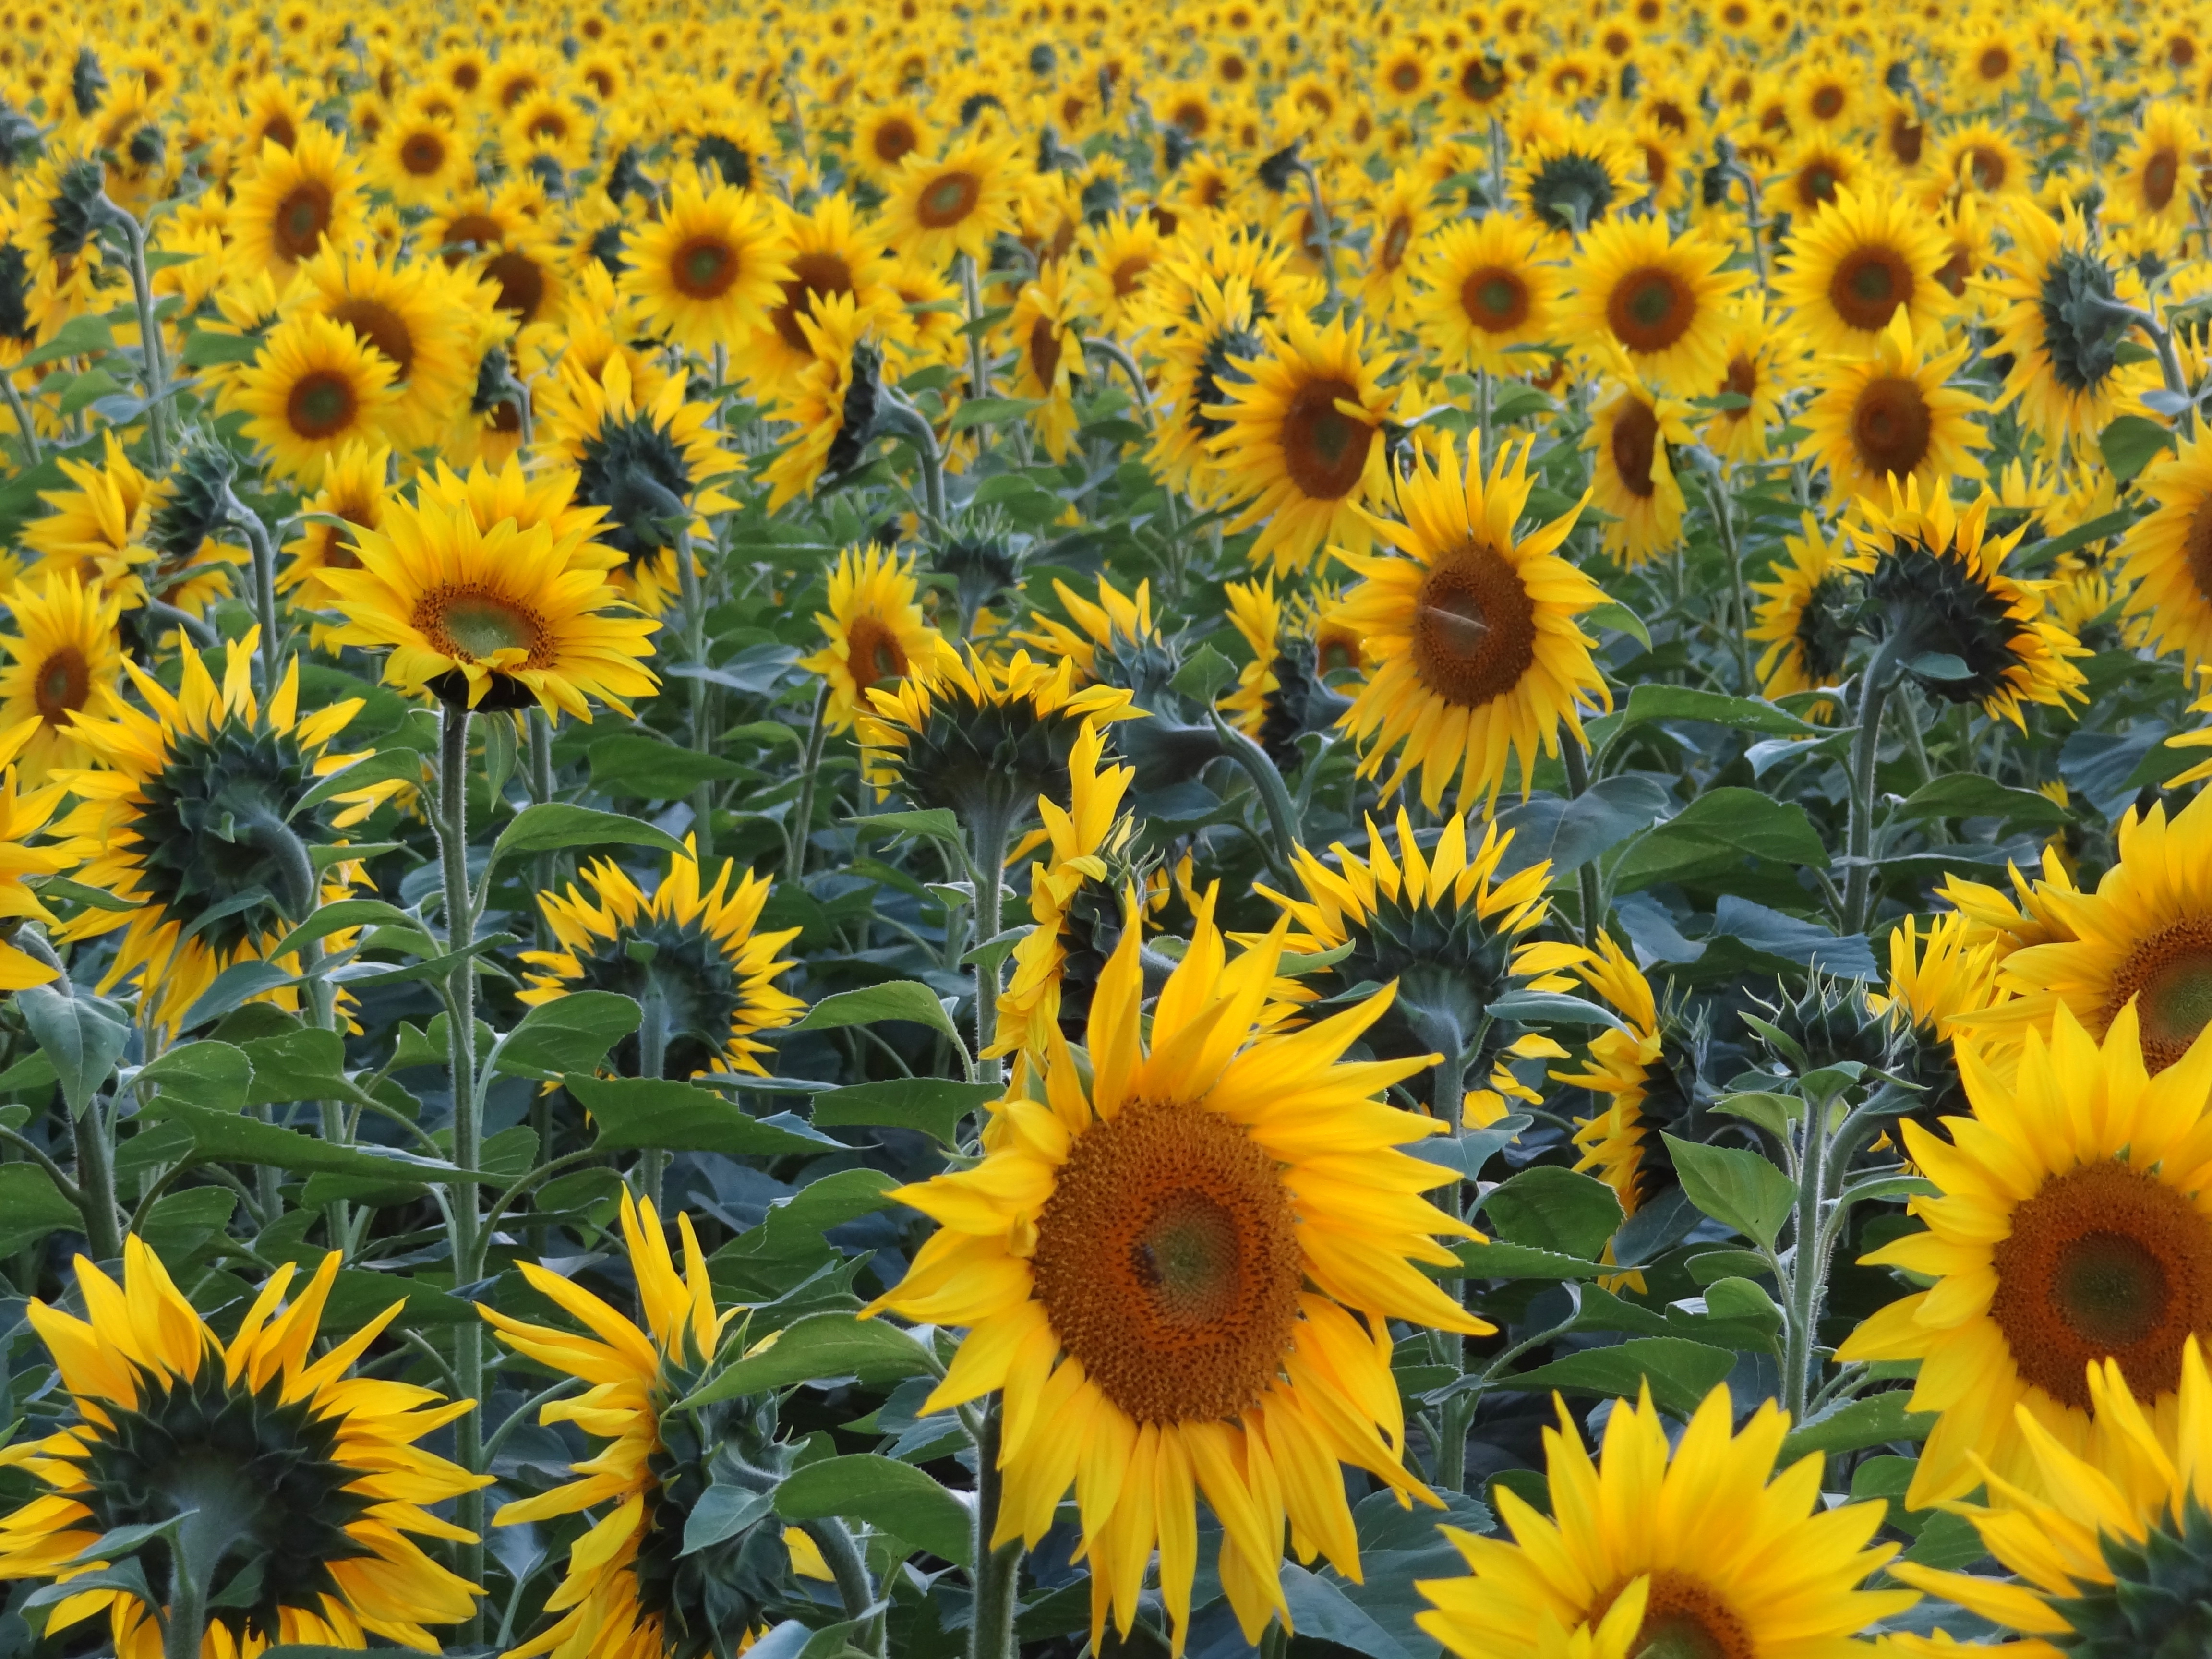 MY DAY: Sunflowers & Yellow Springs | The Haasienda on Shroyer…